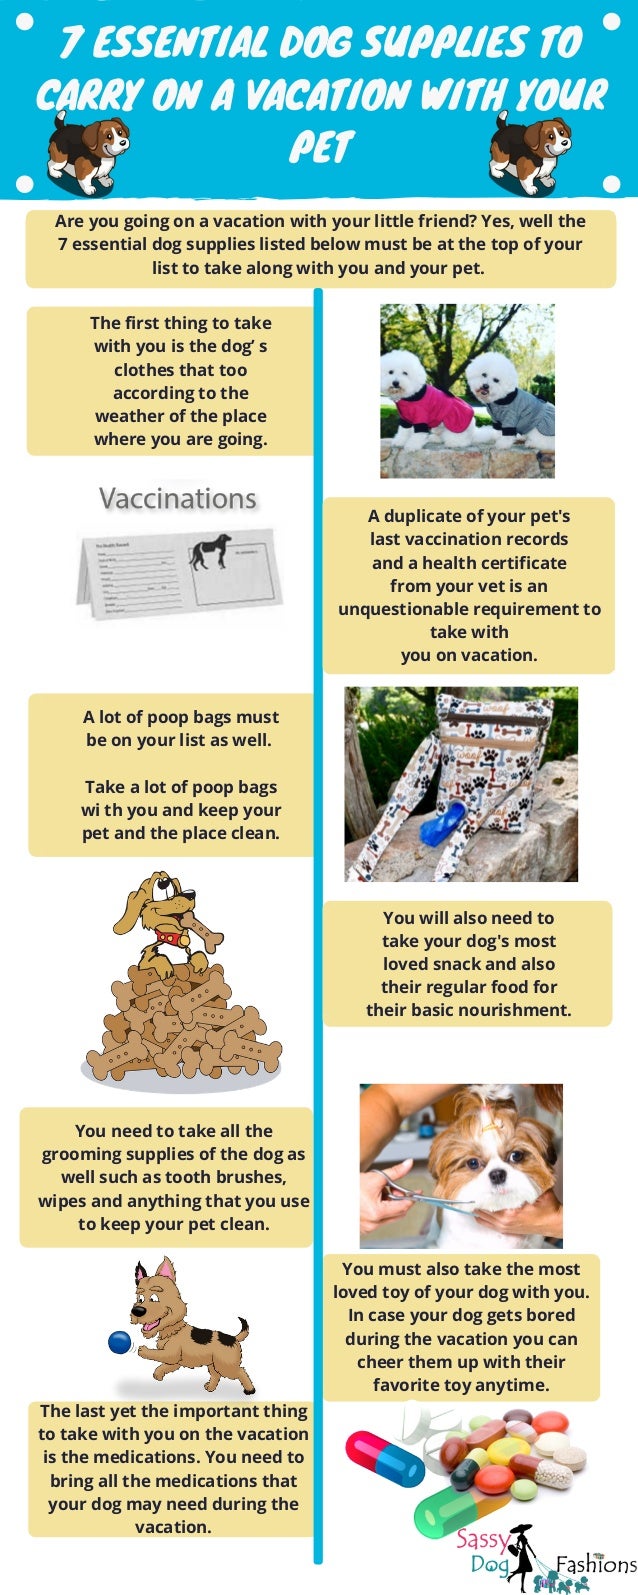 Where to keep your dog when you go on vacation 7 Essential Dog Supplies To Carry On A Vacation With Your Pet